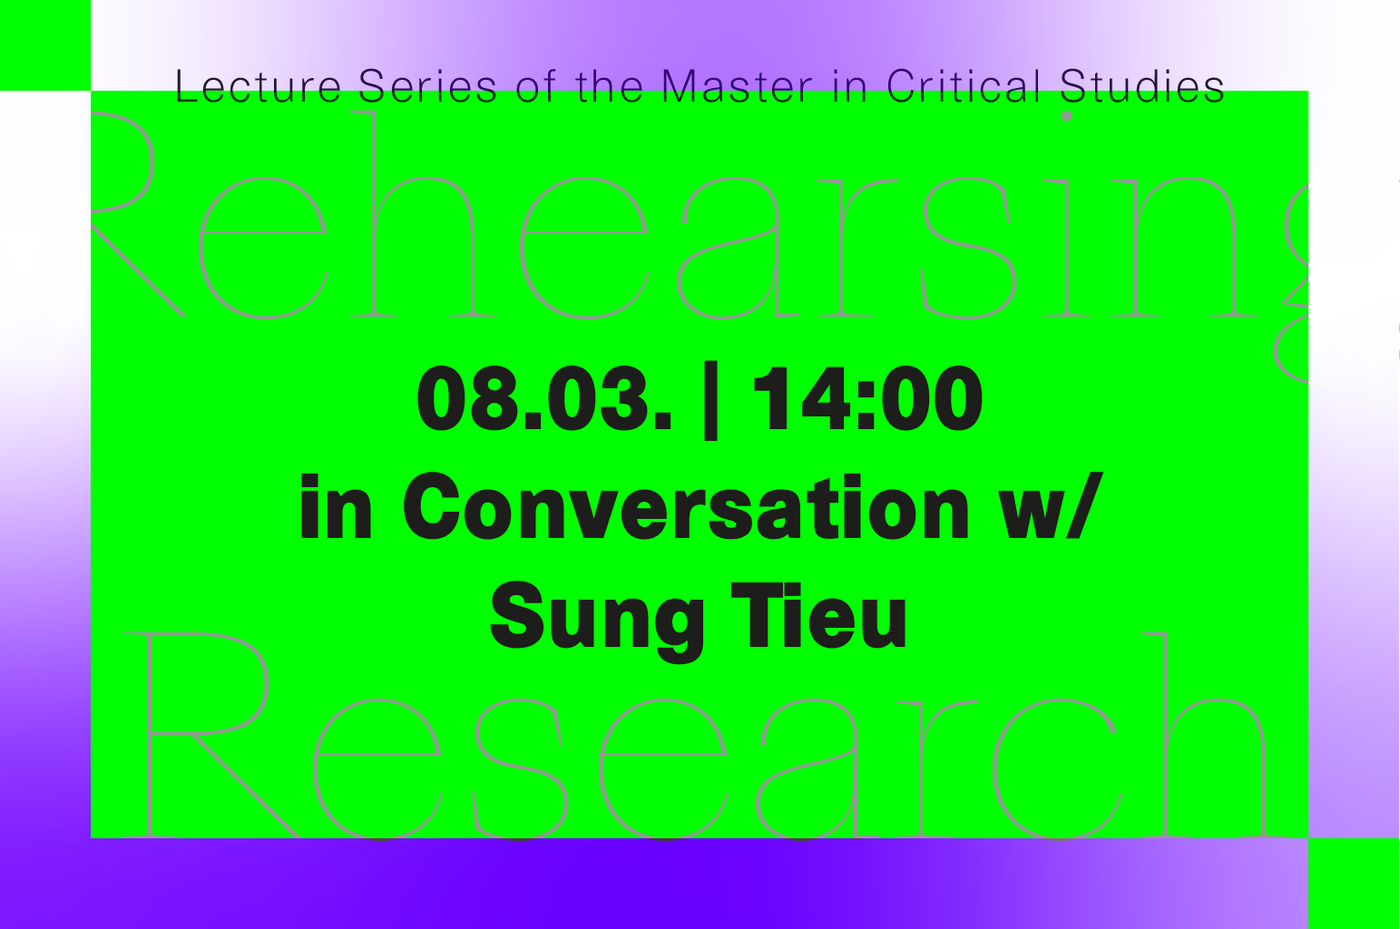 In conversation with Sung Tieu.
 
 Invited by Miram Stoney within the lecture series of the Master of Critical Studies. Coordinated by Jackie Grassmann and Leonie Huber.